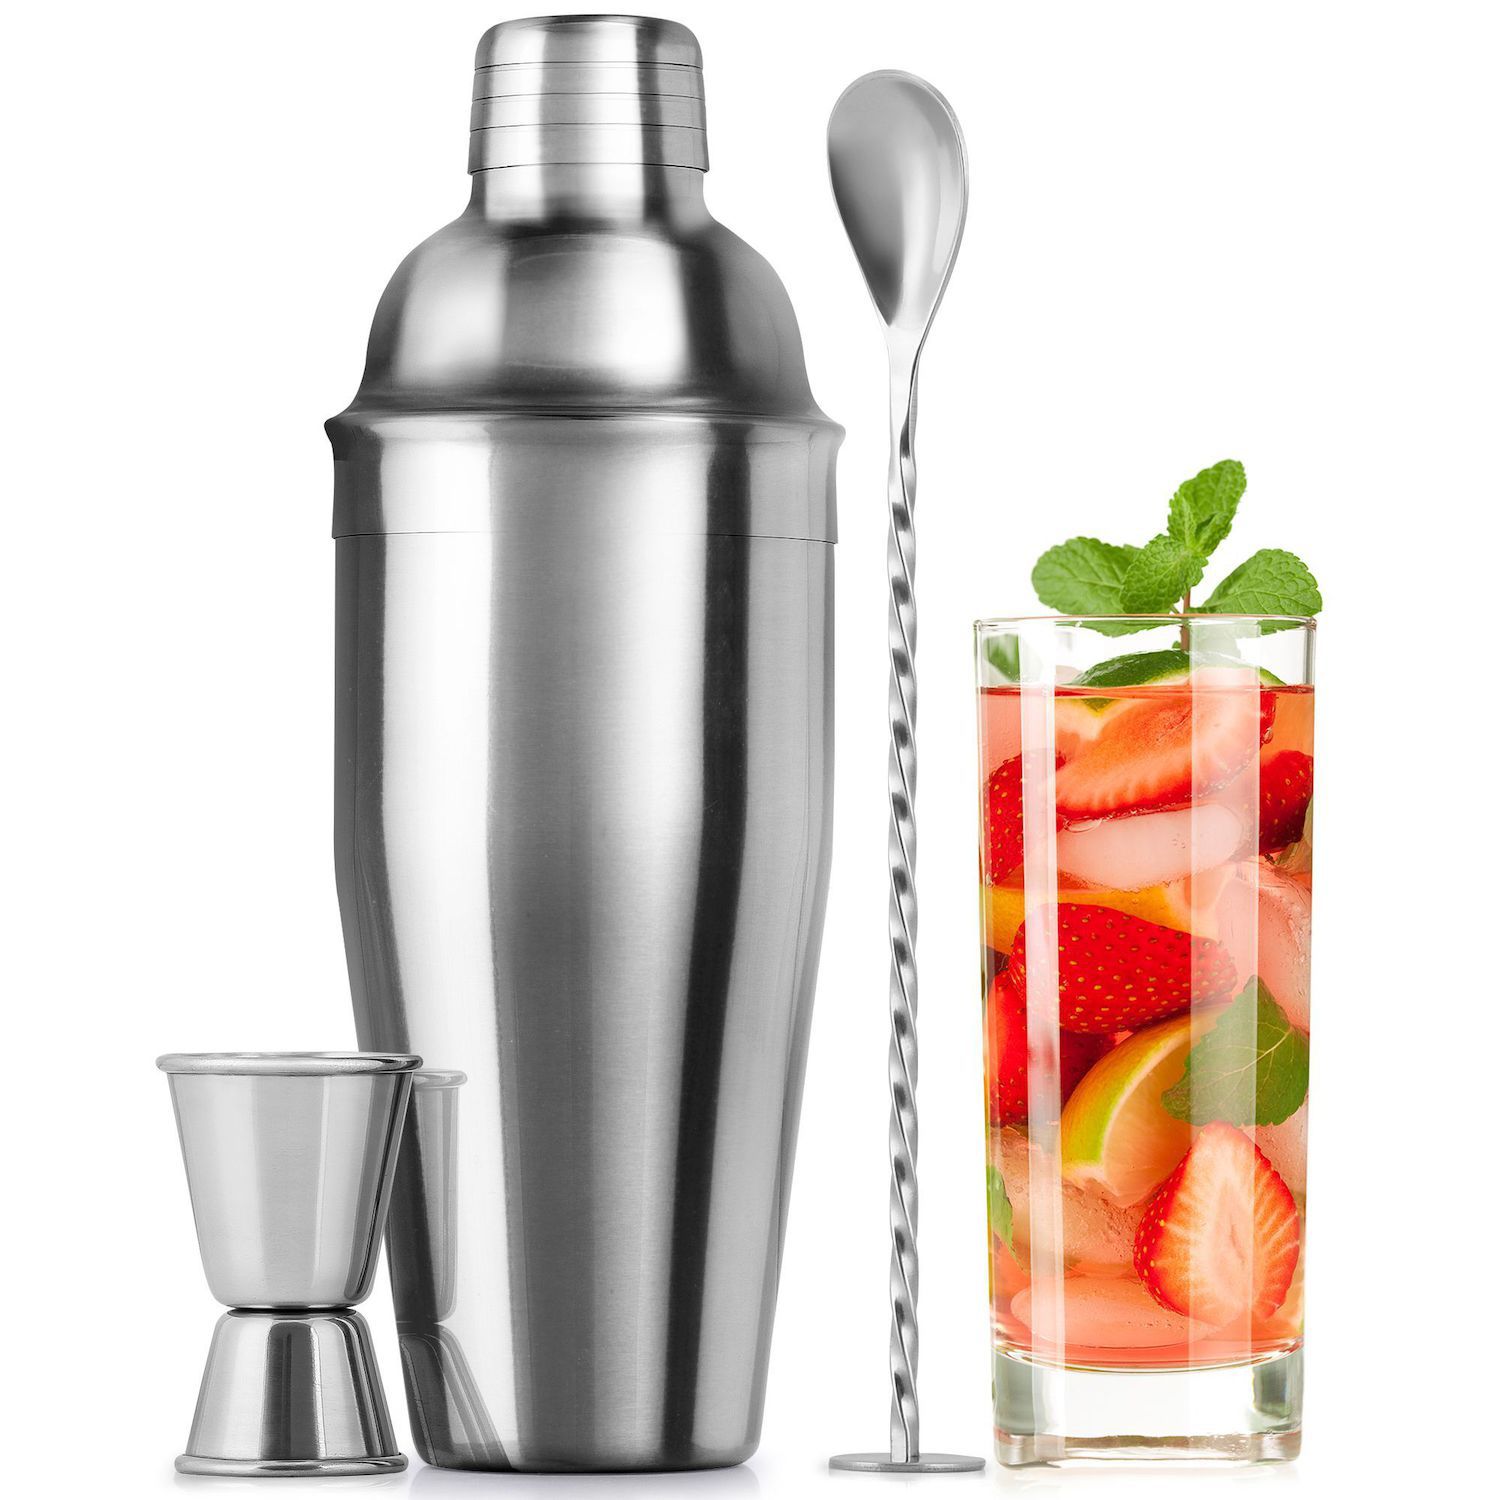  Bartesian Stainless Steel Cocktail Shaker - 16 Ounce Bartender Cocktails  Shakers Bar Accessories for the Home - Bartending Mixology Barware Mixer  Cup - Professional Mixed Drink Shaker Utensil Tool: Home & Kitchen